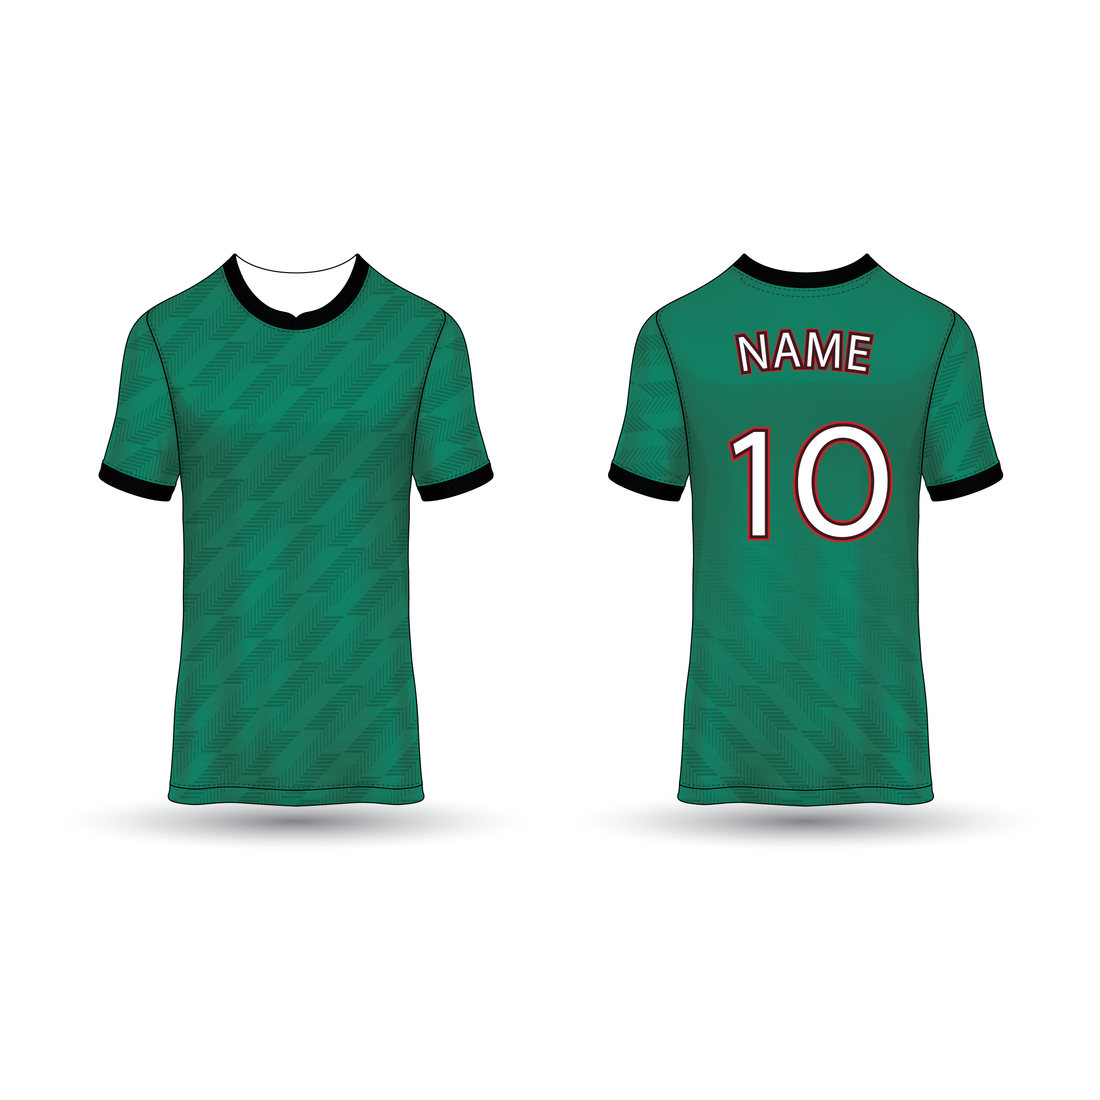 NEXT PRINT All Over Printed Customized Sublimation T-Shirt Unisex Sports Jersey Player Name & Number, Team Name NP50000233